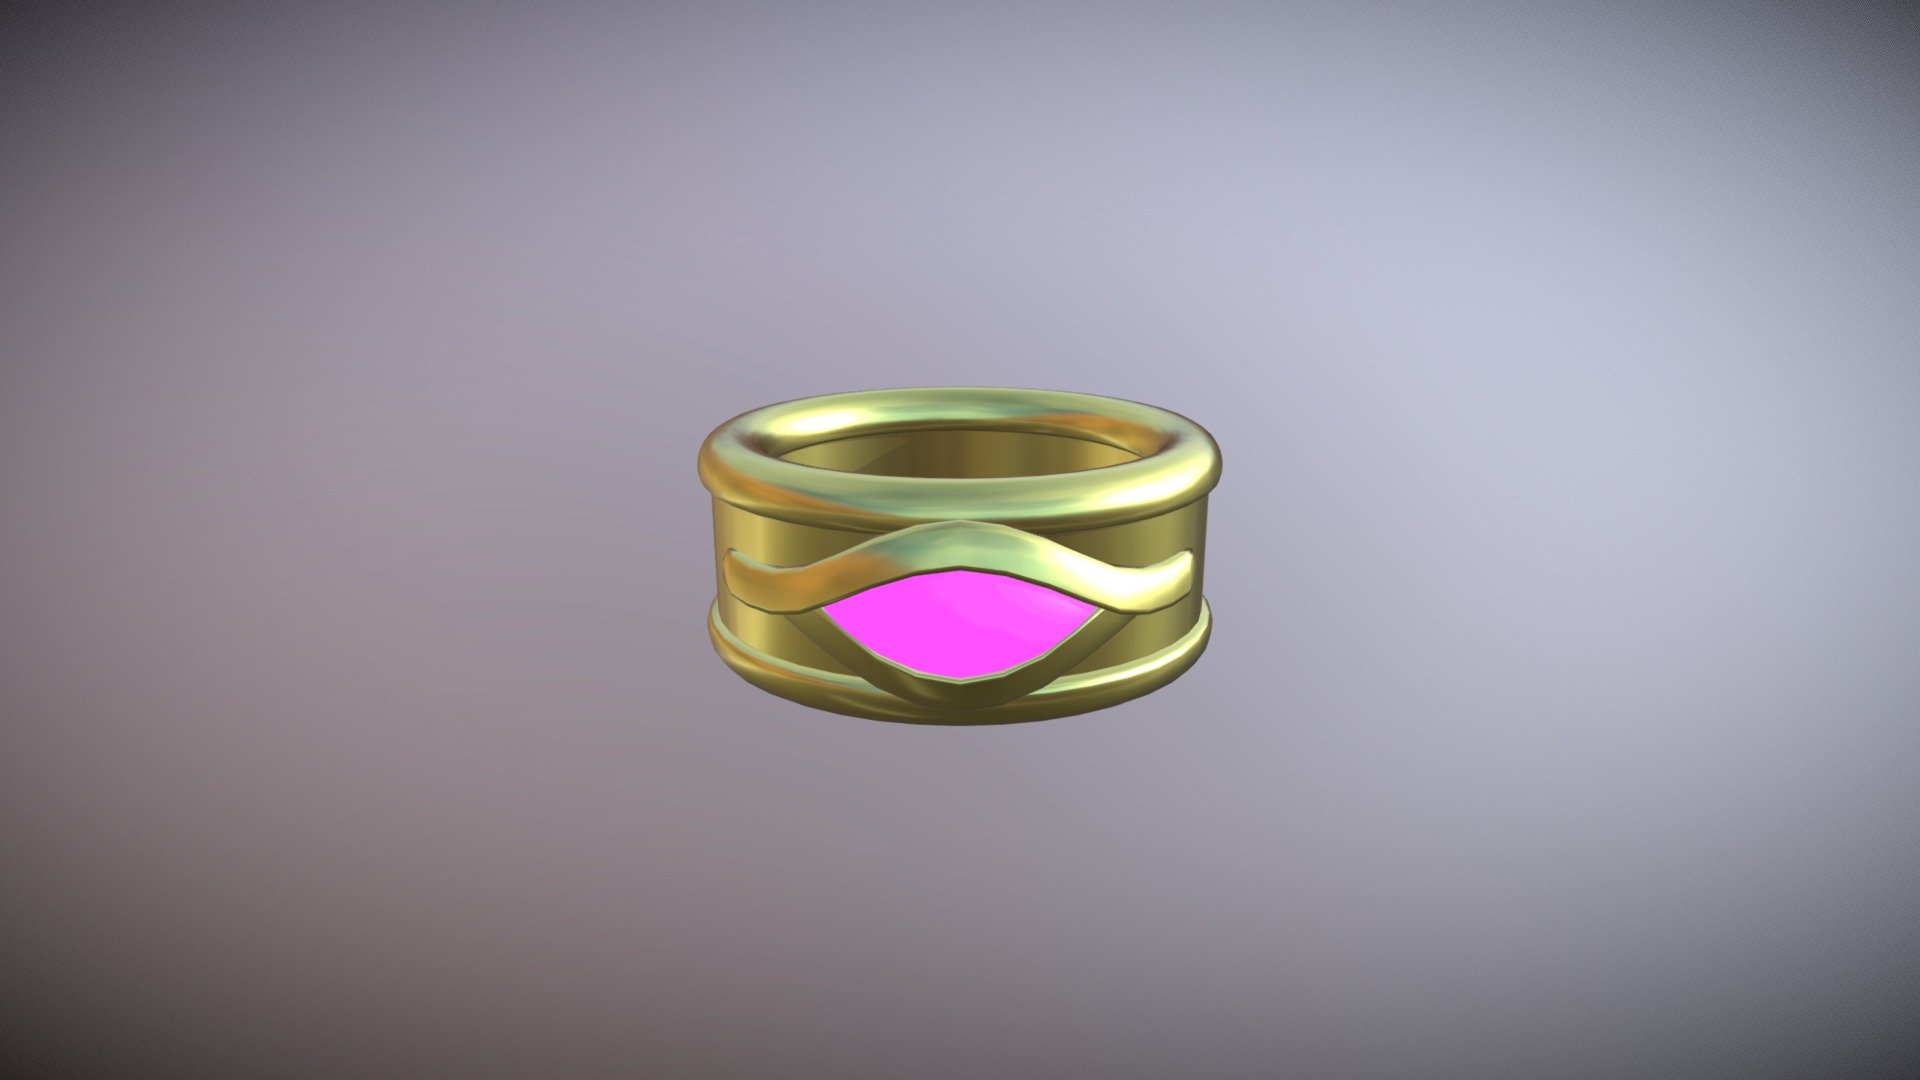 Short Form -
A magic item, given to the hero as payment for his good deeds. During his adventures in Lorule, the bracelet absorbed the powers of that kingdom's evil sorcerer.

Long Form -
Near the end of Hyrule's Era of Dark and Light, the hero of the time encountered a wicked sorcerer from another realm, trying obtain Hyrule's Triforce. The Hero's first encounter with the sorcerer goes awry, but afterwards he encounters a mysterious merchant that grants him this strange bracelet. After a second encounter with the sorcerer, the bracelet absorbed some of his power, and gave the hero new abilities. With the power to project his flat form against walls, the hero gained the ability to freely travel between Hyrule and its mirror realm, Lorule. Ultimately, the hero used this power to defeat the sorcerer, and save not only Hyrule, but inverted kingdom as well.

A Link Between Worlds - 2013 - Ravio's Bracelet - 3D model by Navillus (@Navillus001) 3d model